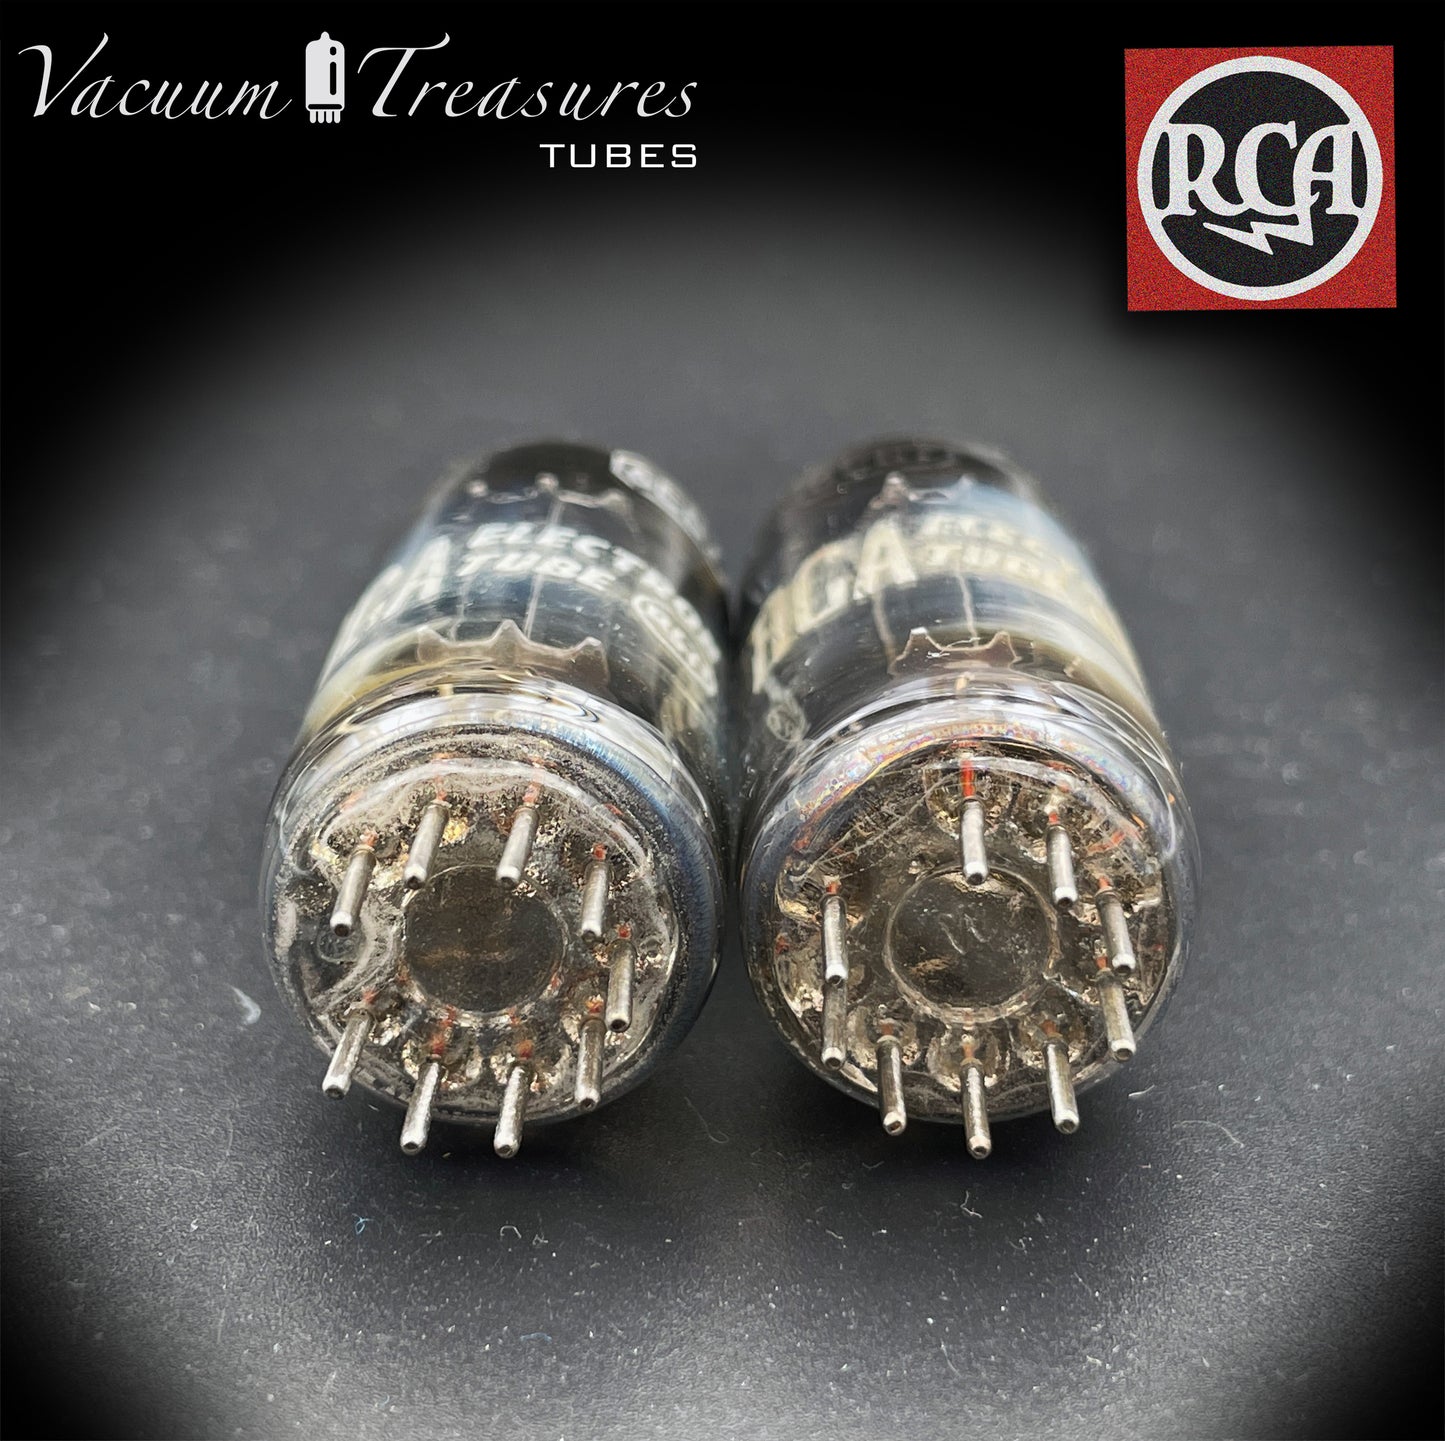 6CG7 ( 6FQ7 ) RCA Triple Black Plates Horse Shoe Getter Tested Pair Tubes Made in USA